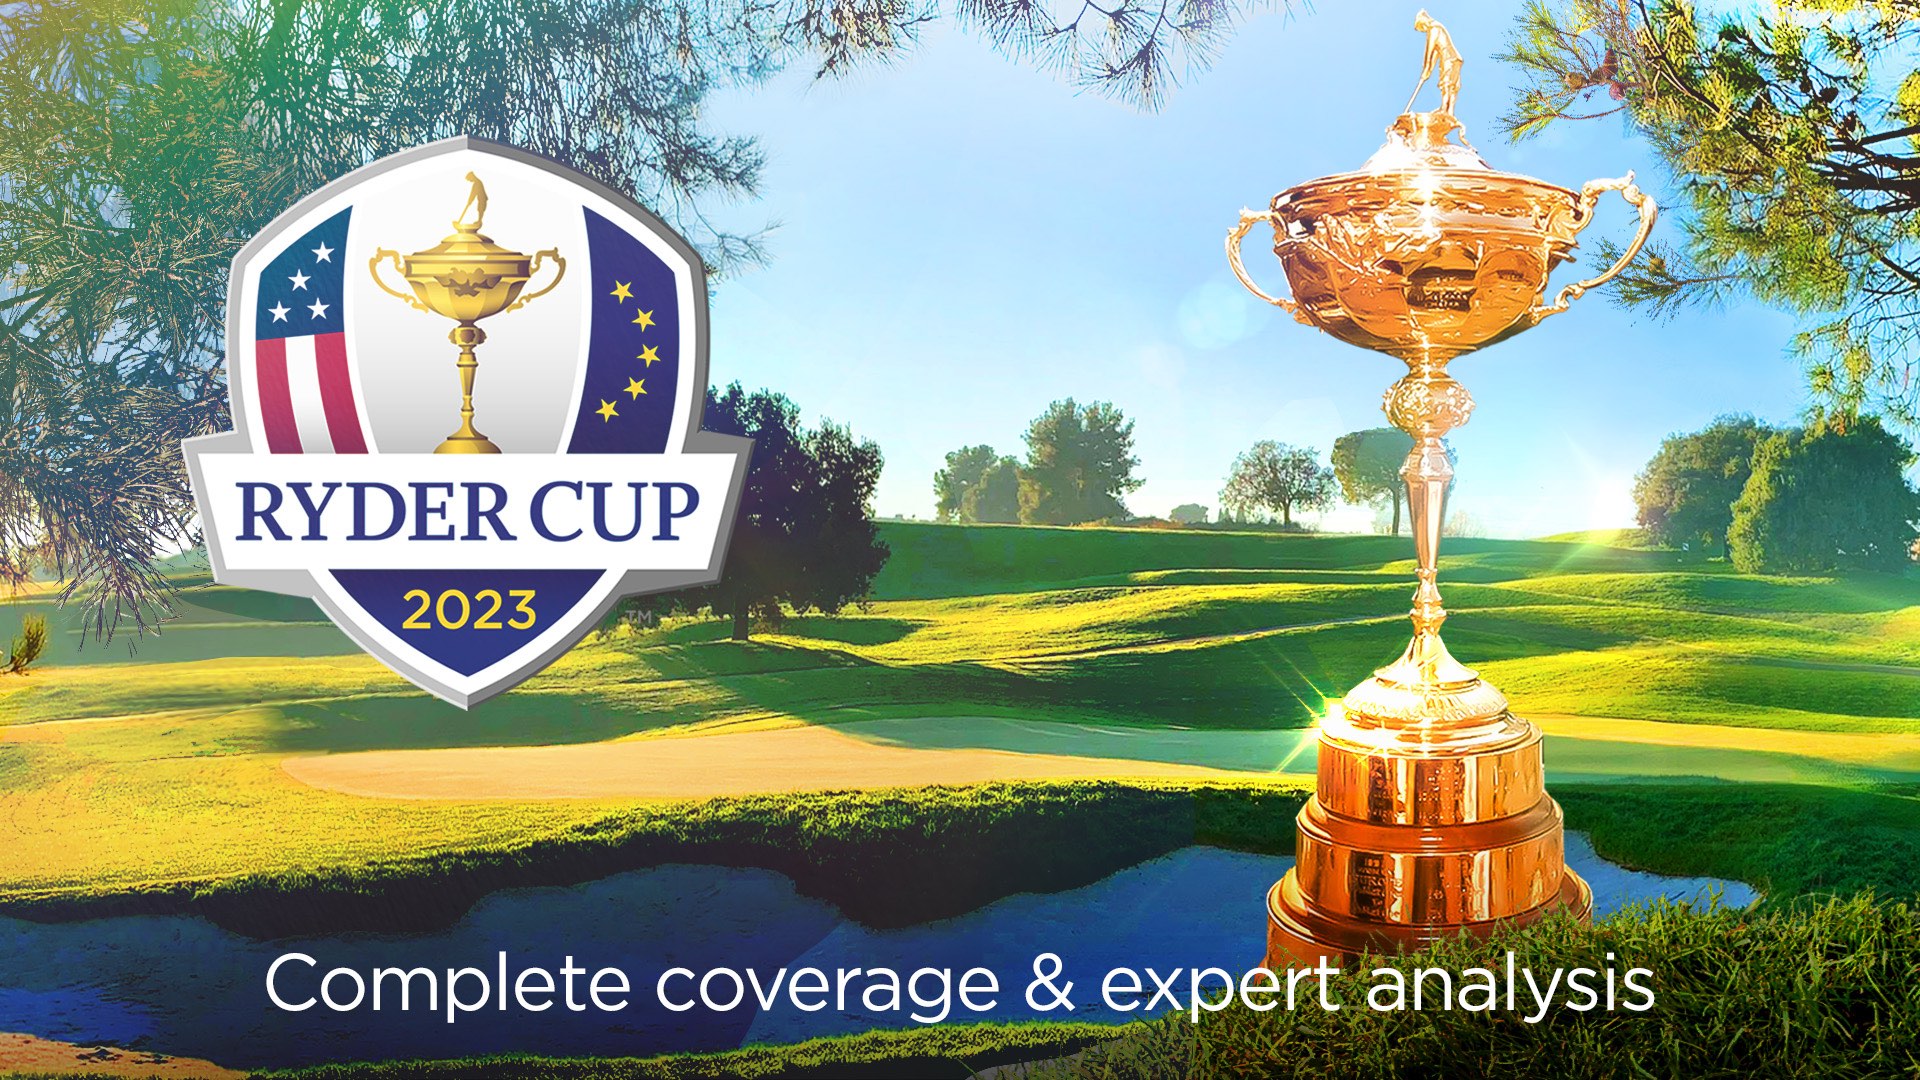 Listen to the 2023 Ryder Cup live on SiriusXM